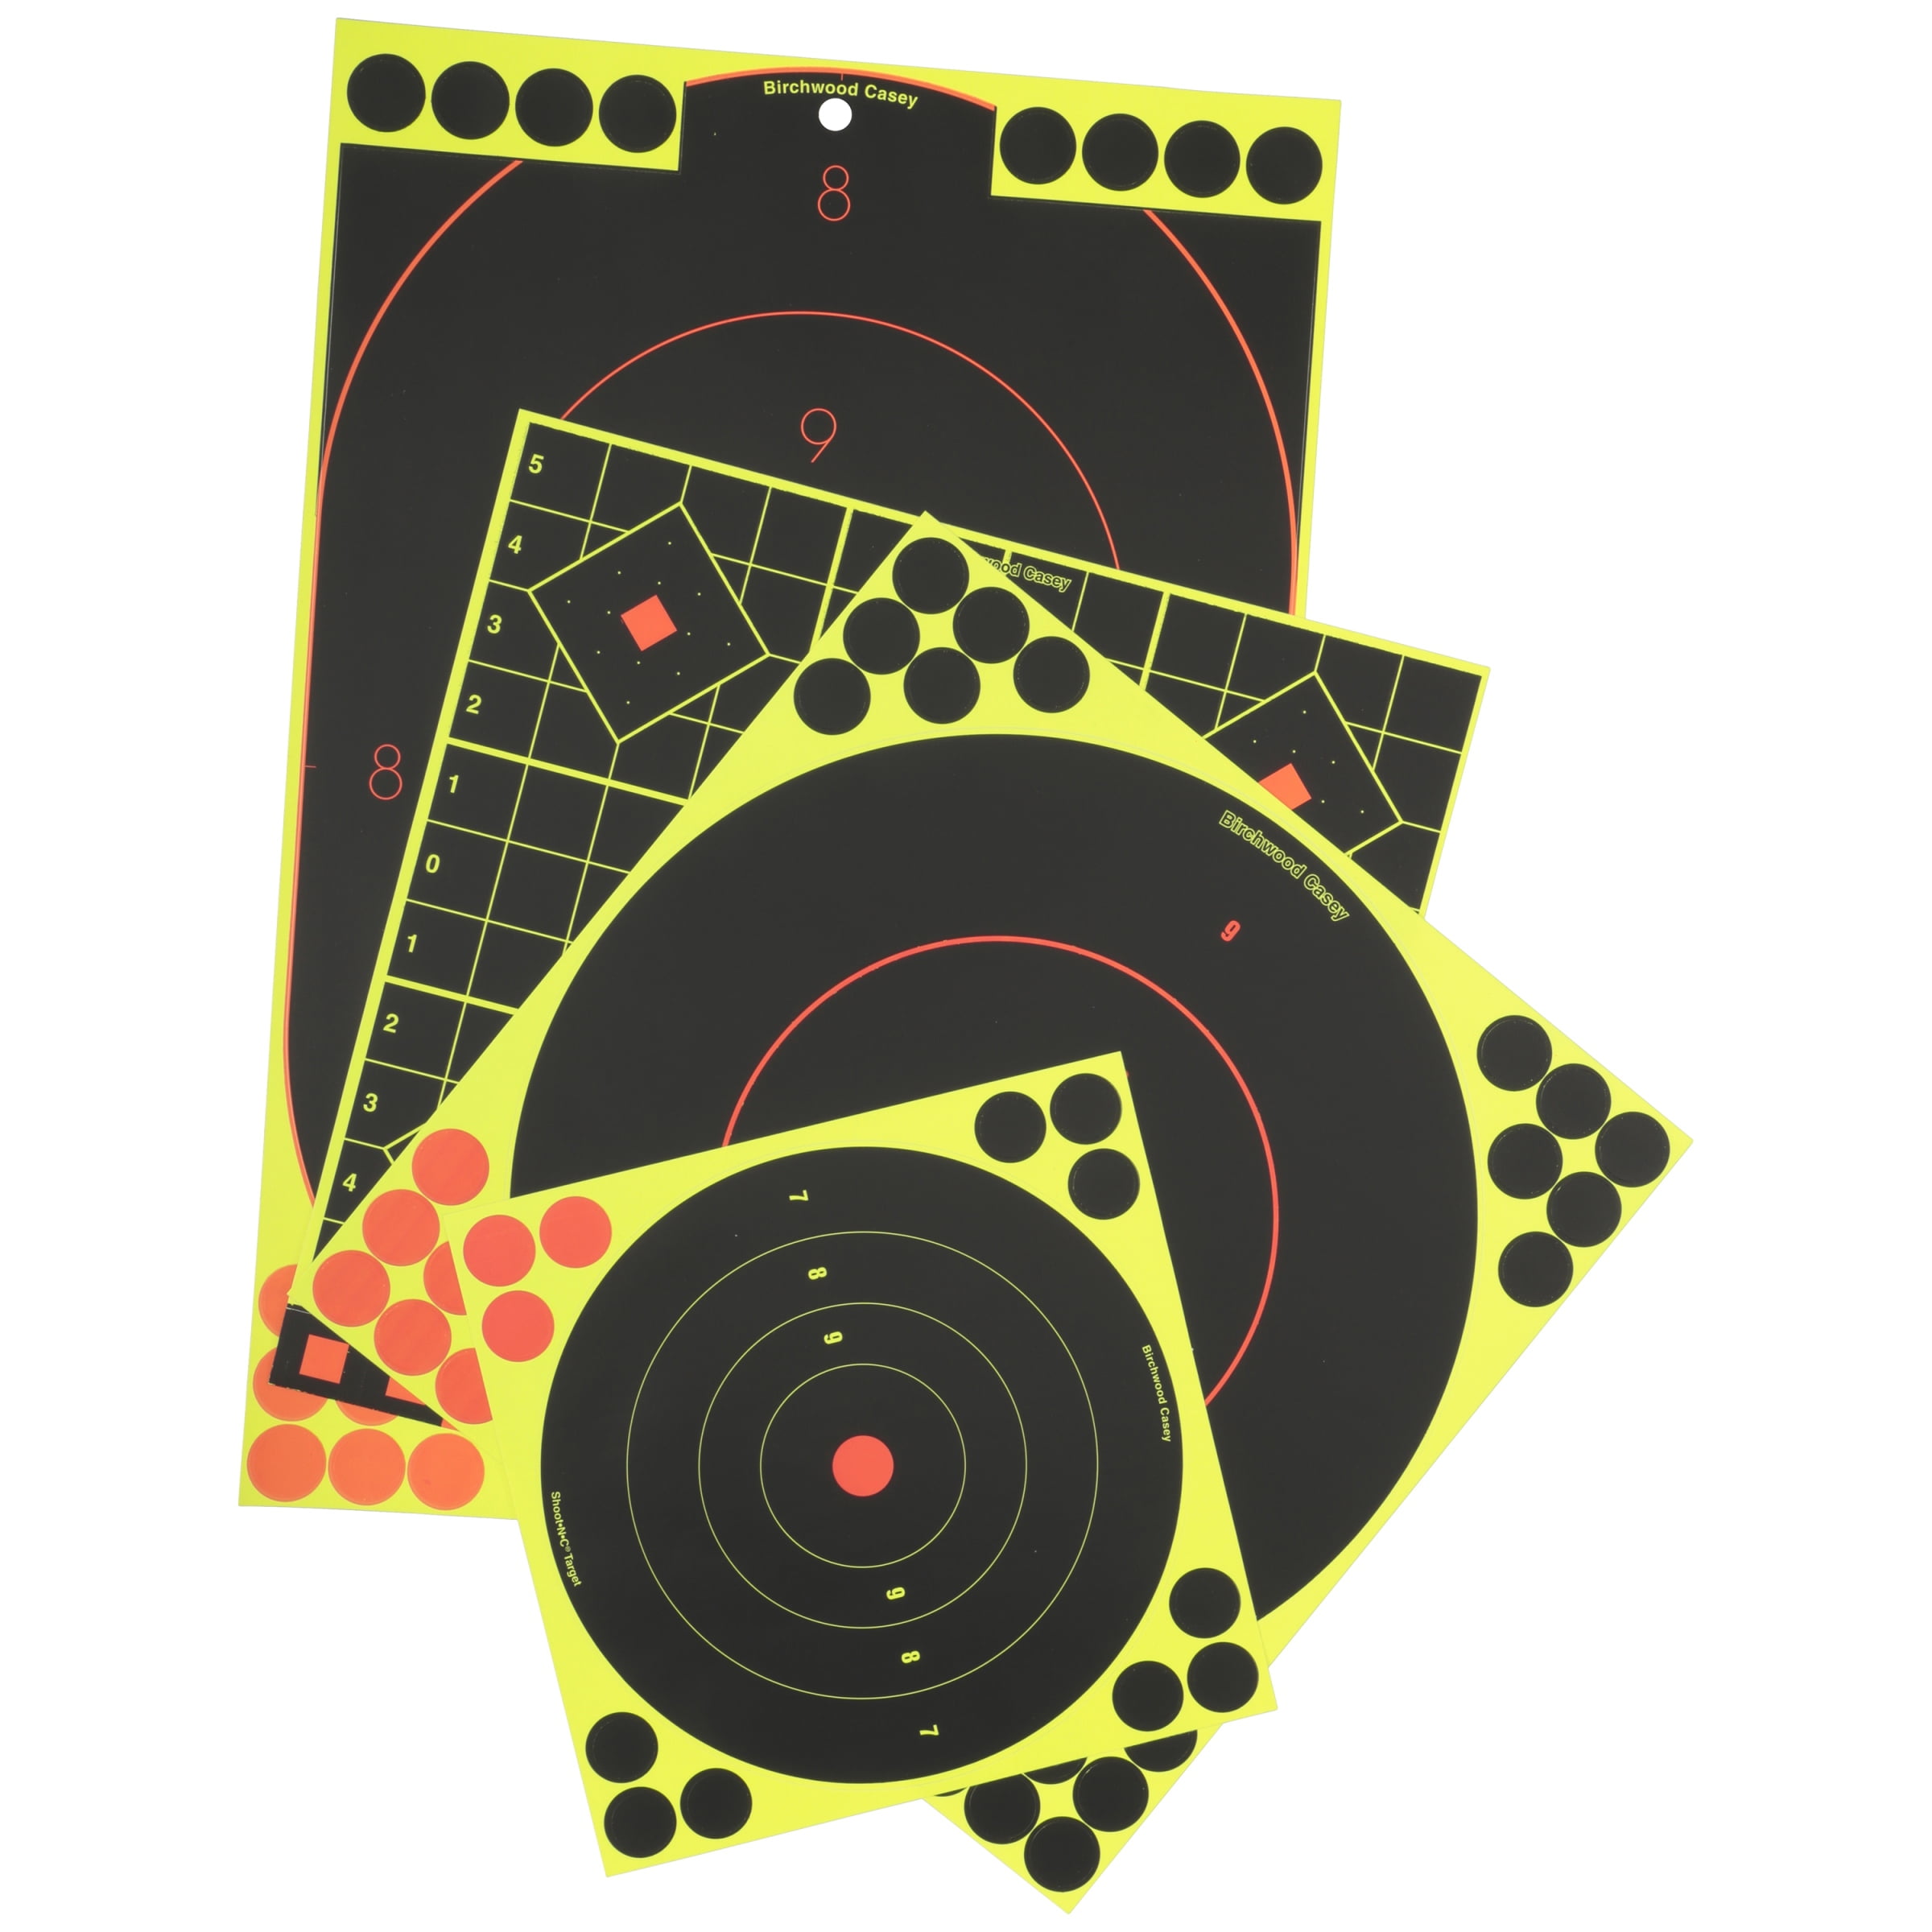 Birchwood Casey Shoot N C Reactive Targets Pink Self Adhesive 6 Sheets 8" 34808 for sale online 